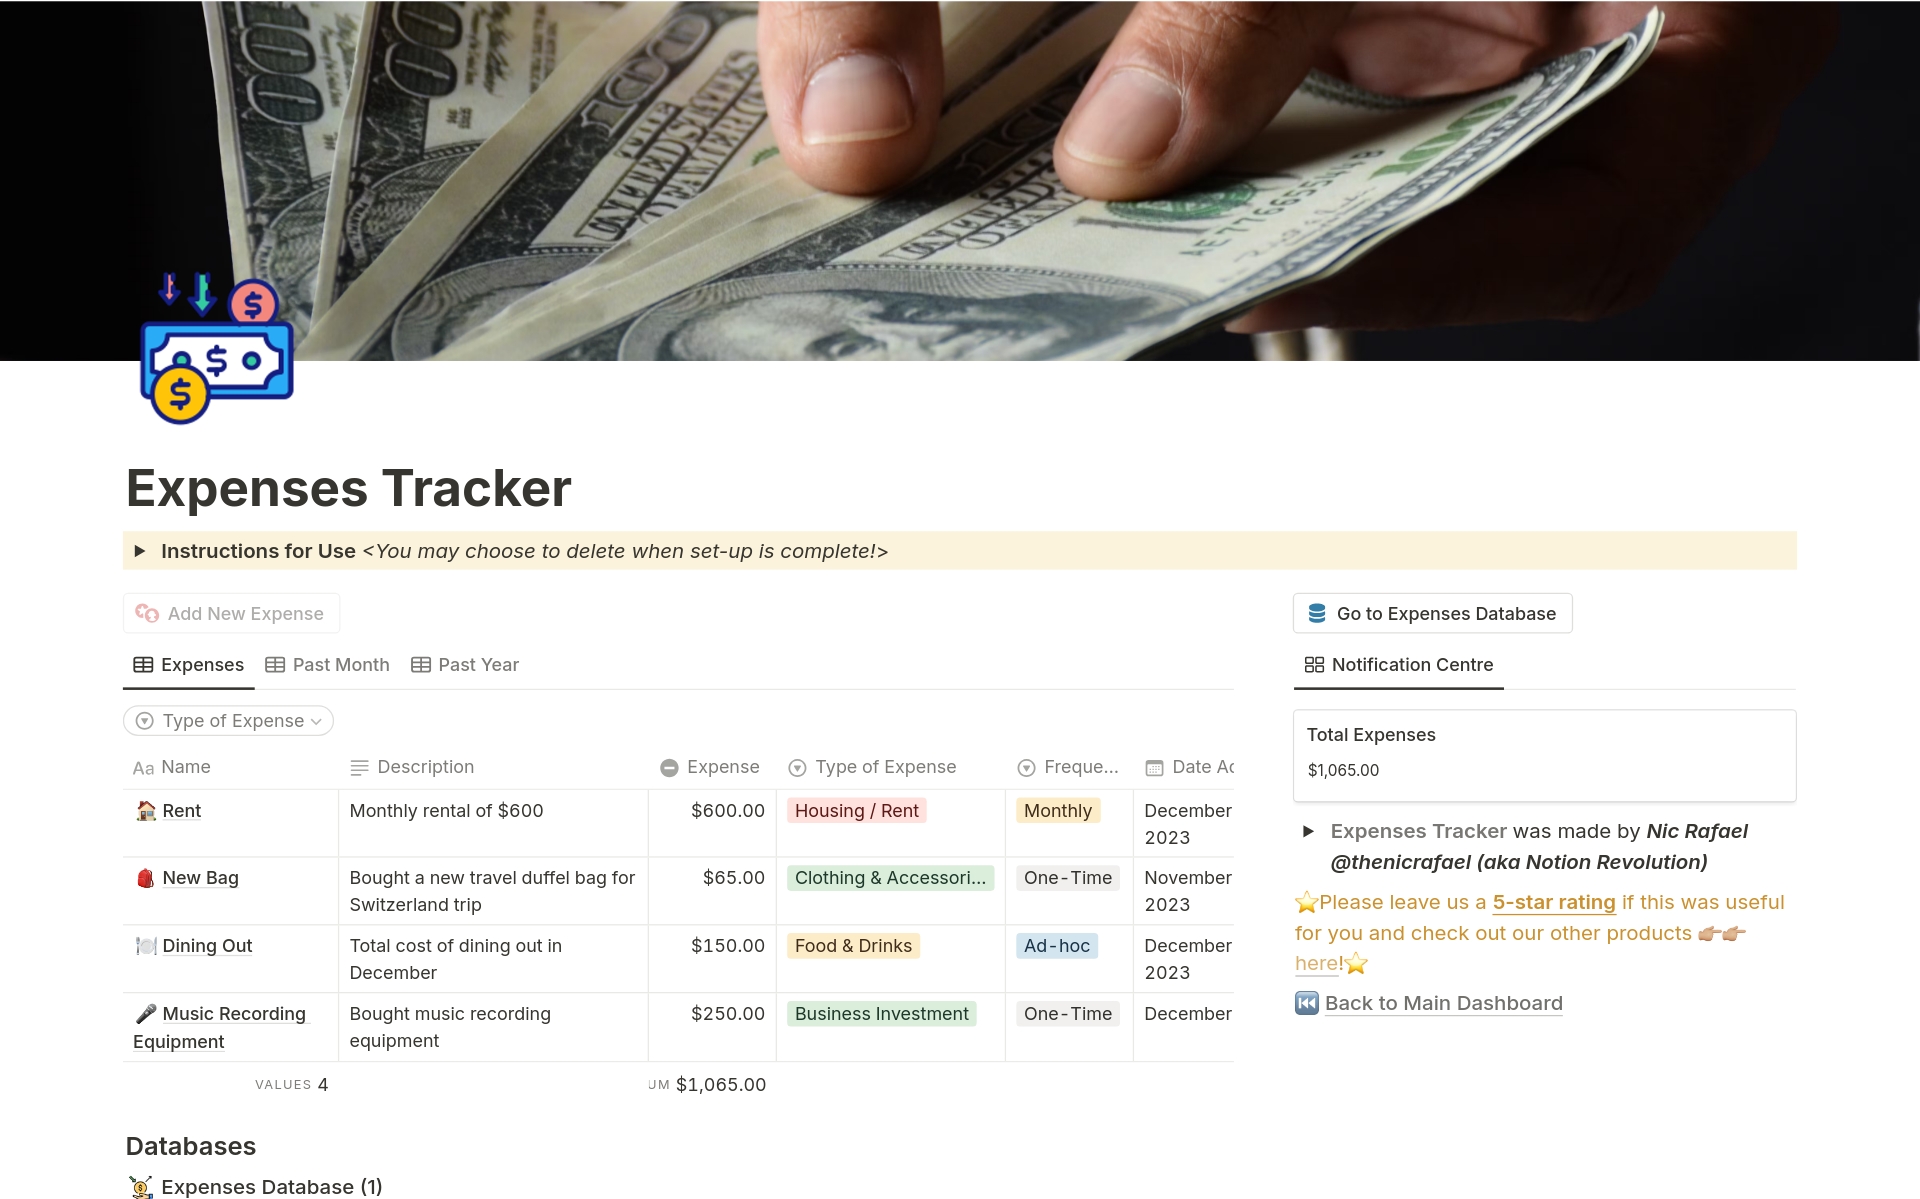 The Expenses Tracker is useful for all students and professionals who could use a simple and intuitive solution to track all their expenses, in order to achieve their saving goals. It is completely free to use!